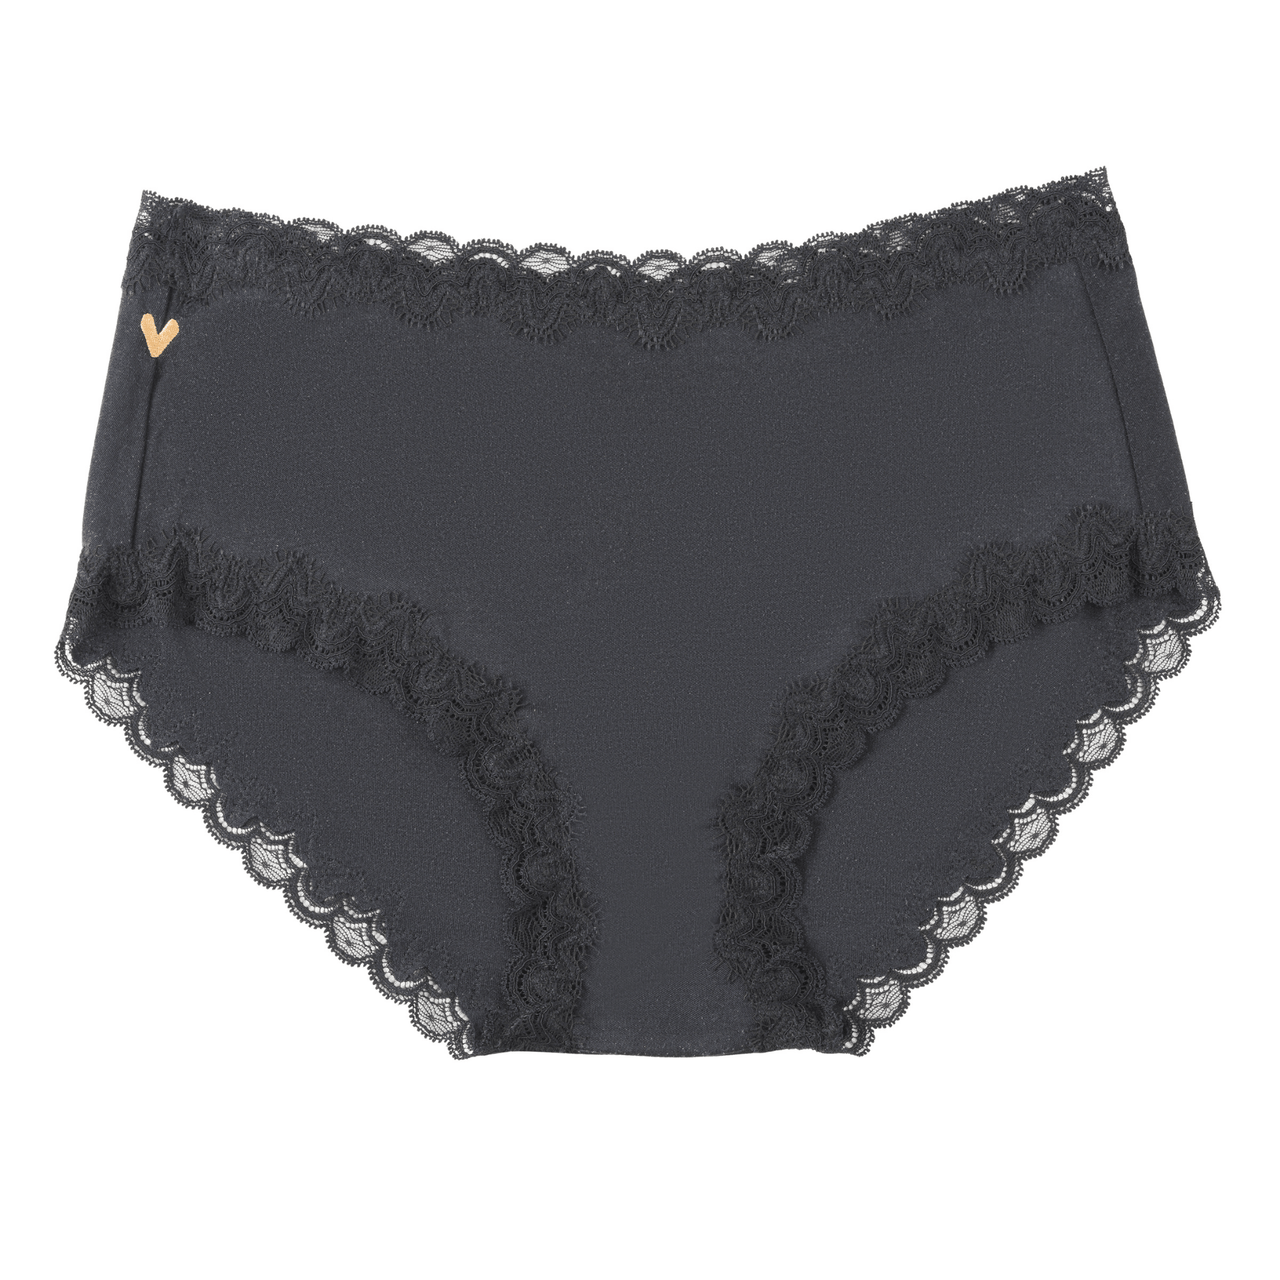 What is the Best Material for Underwear? – Uwila Warrior